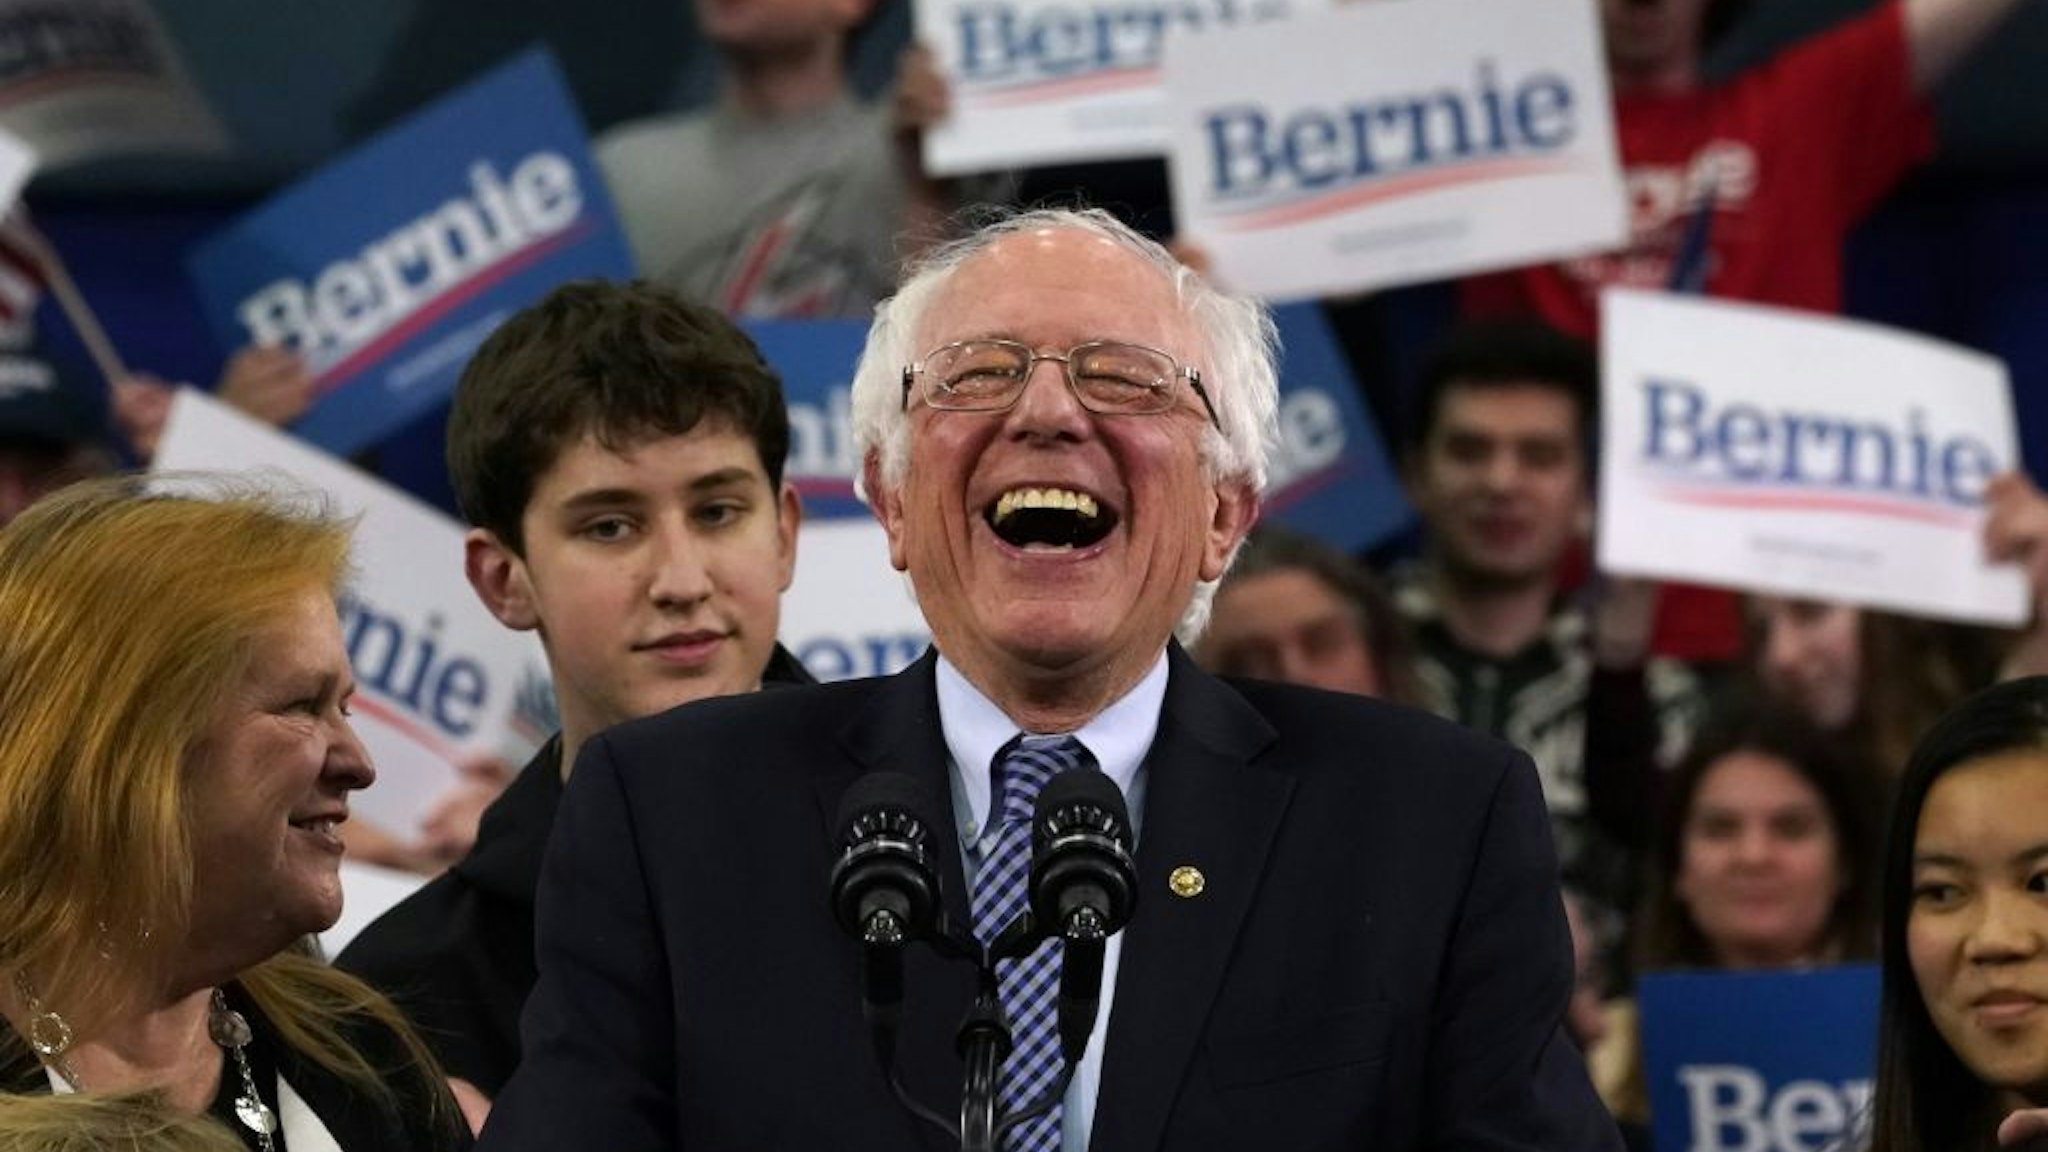 Democratic presidential hopeful Vermont Senator Bernie Sanders speaks at a Primary Night event at the SNHU Field House in Manchester, New Hampshire on February 11, 2020.